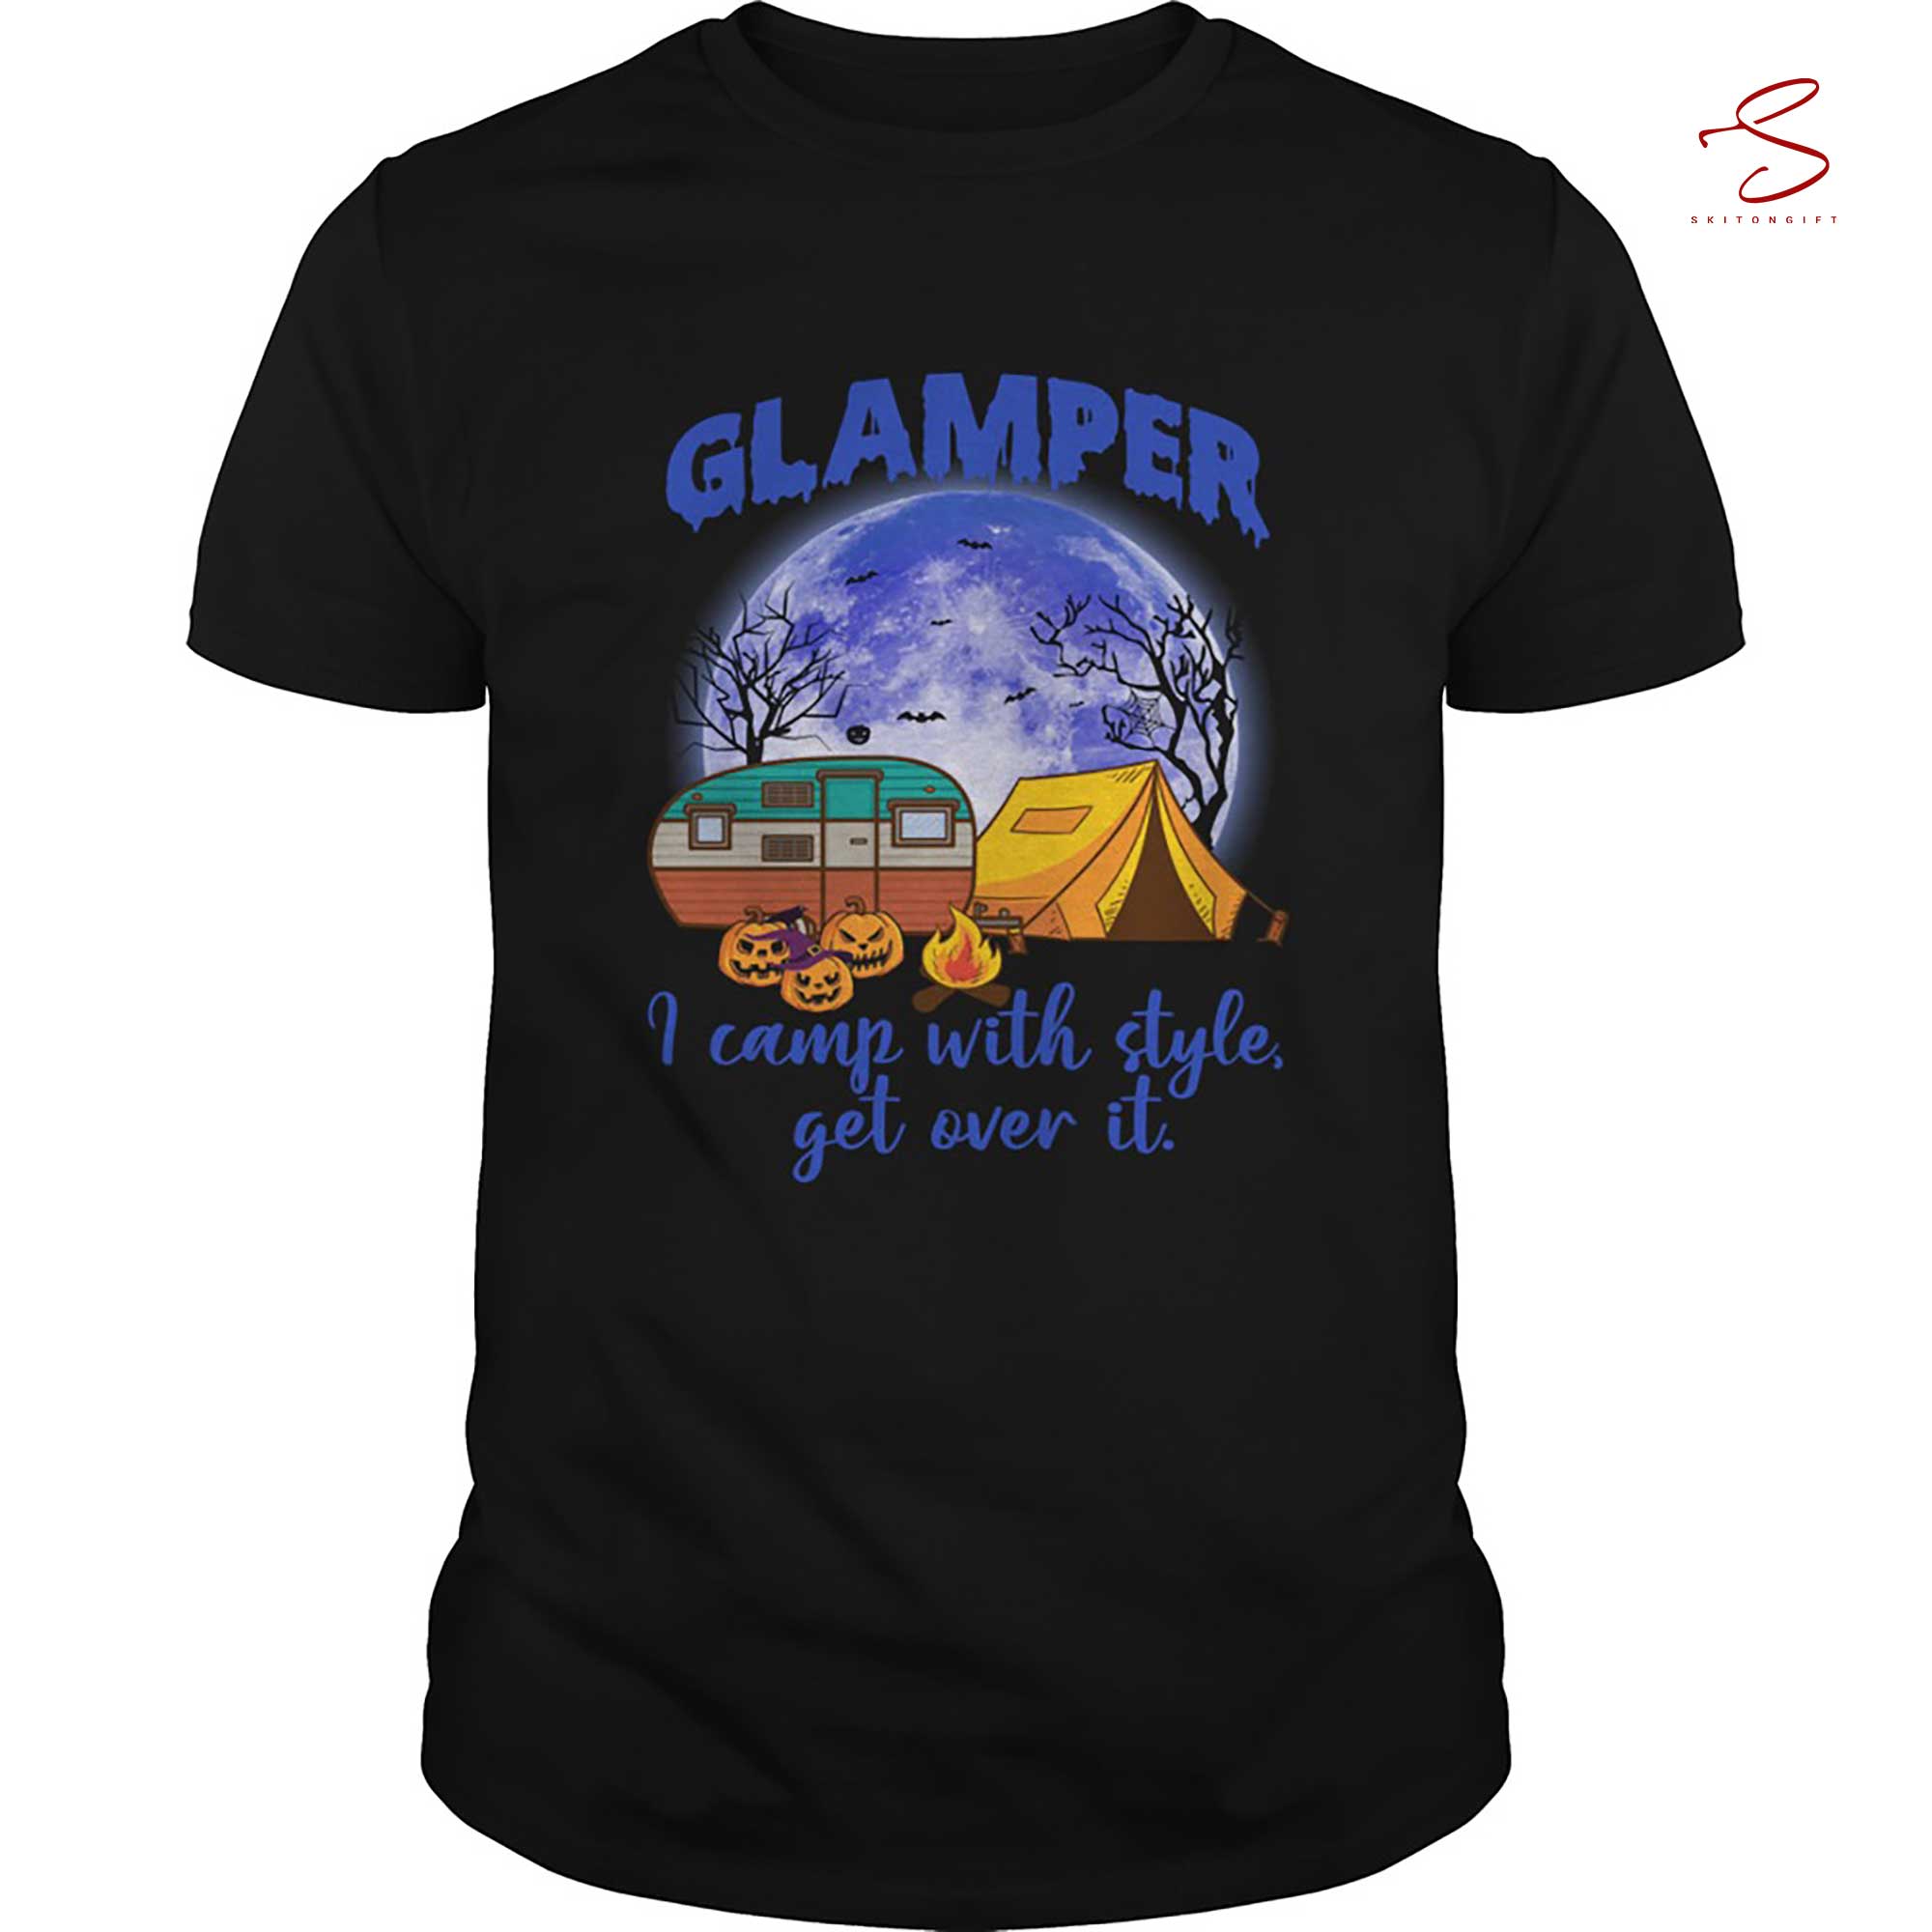 Skitongift Glamper I Camp With Style Get Over It Funny Halloween Camping T Shirt